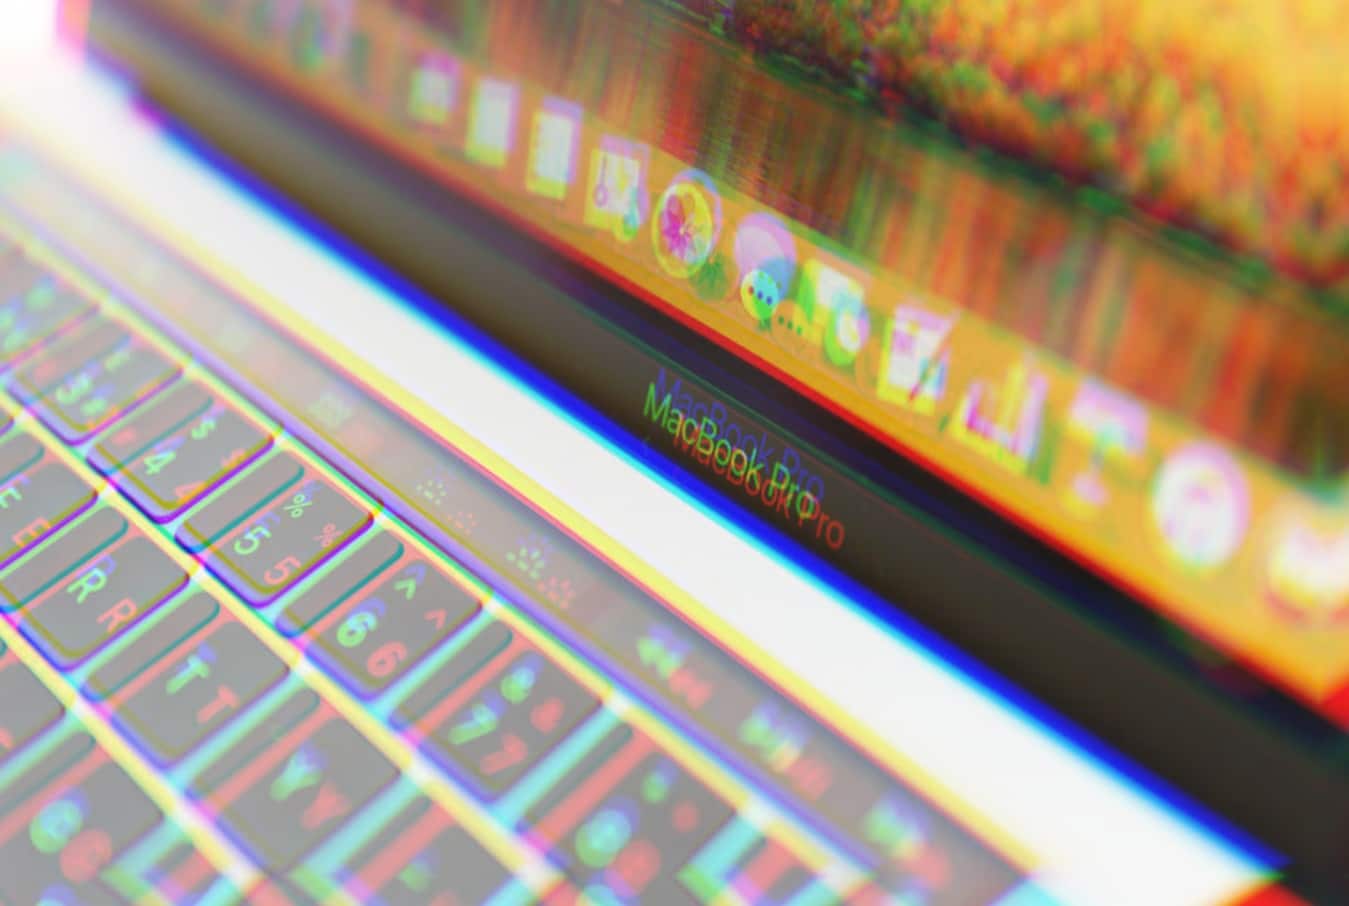 Malware XCSSET targets macOS by infecting Xcode developer projects